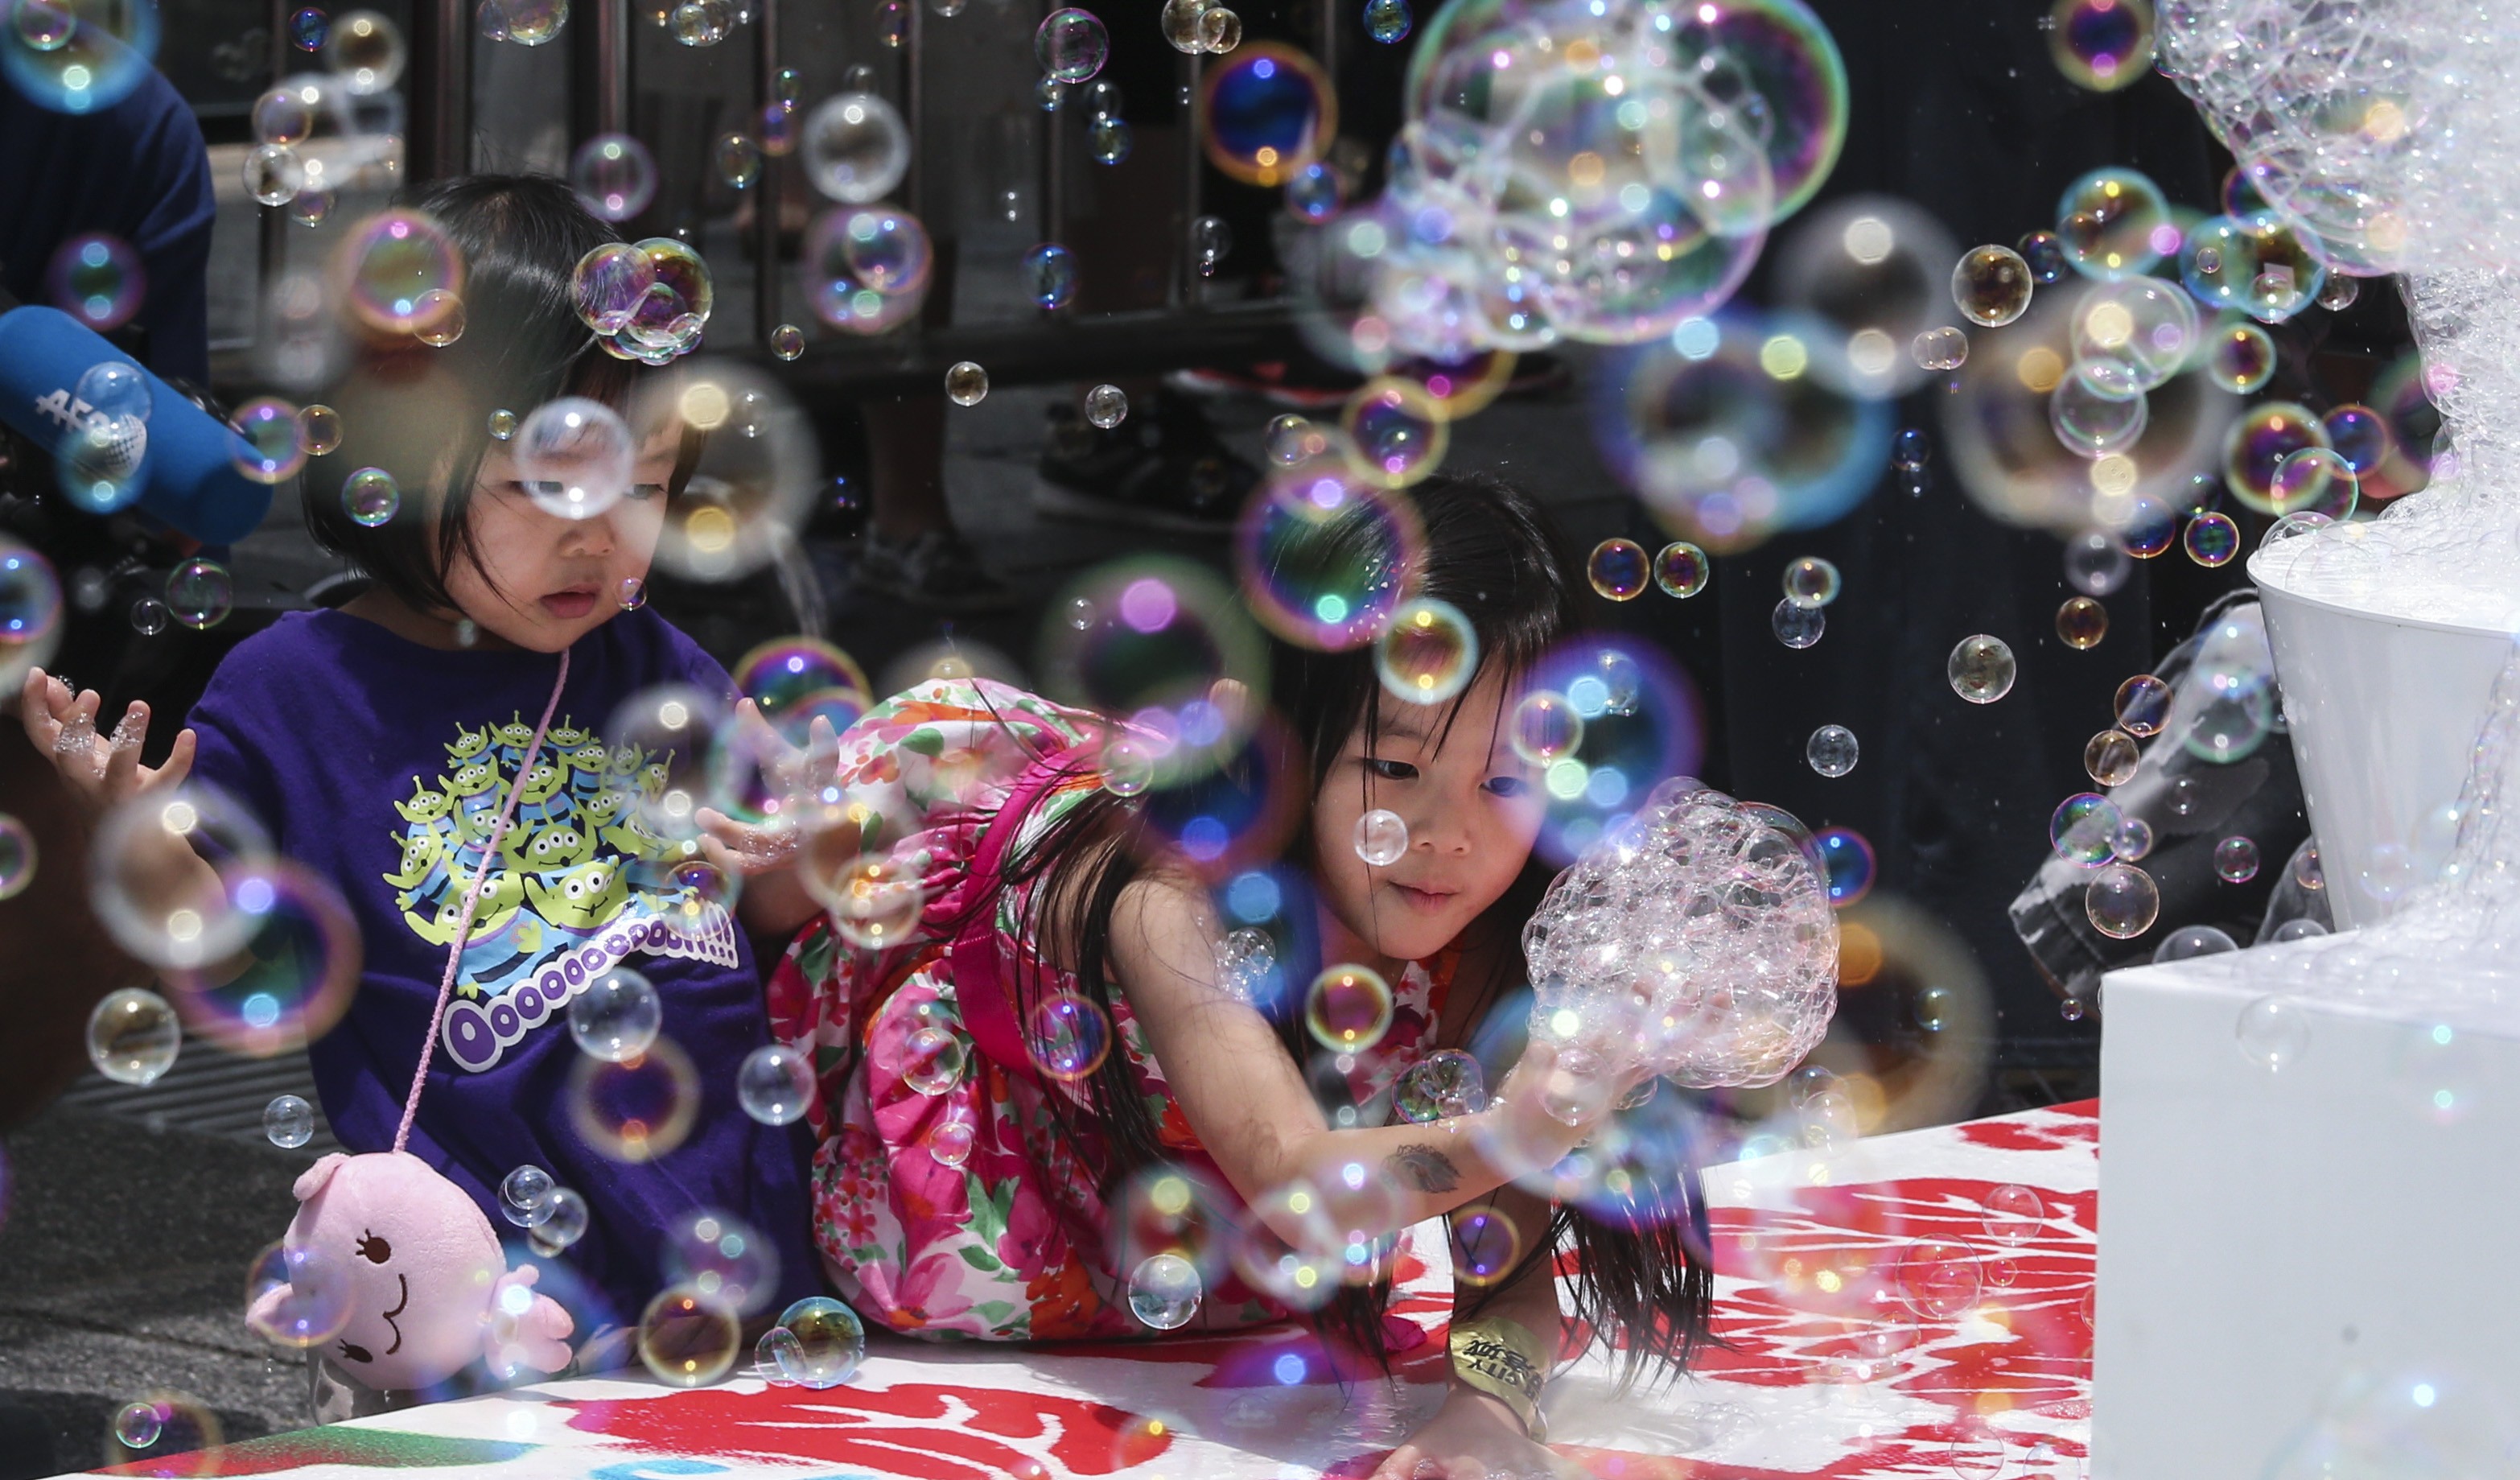 Transforming Victoria Harbour with "10 Million Bubbles" opening ceremony at the Ocean Terminal Forecourt, Harbour City in Tsim Sha Tsui. Photo: SCMP / David Wong